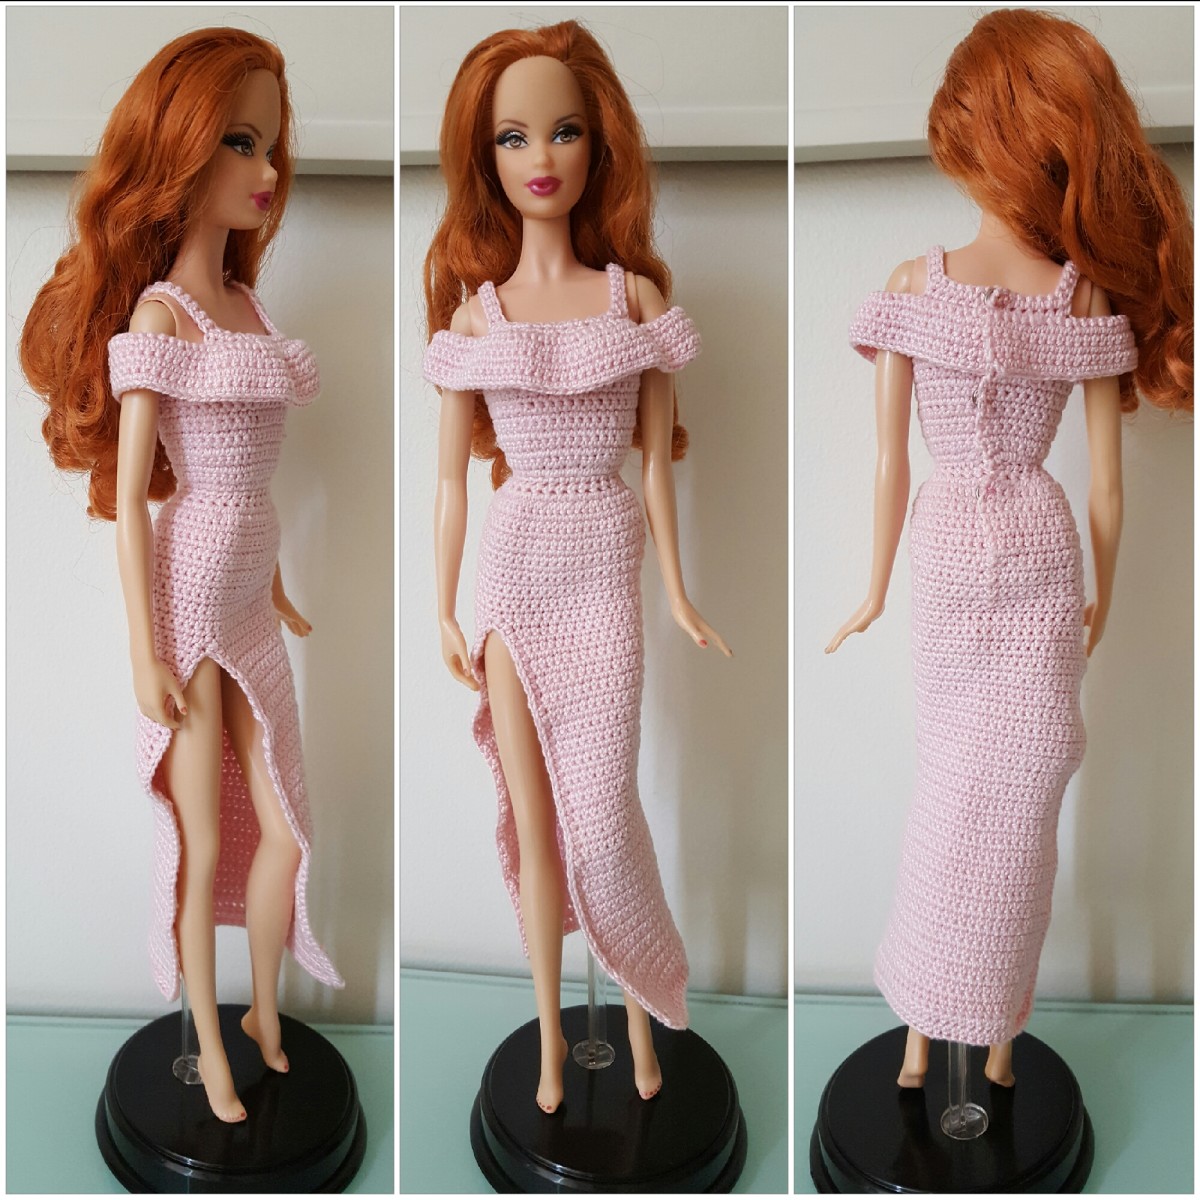 On types body barbie dress different bodycon